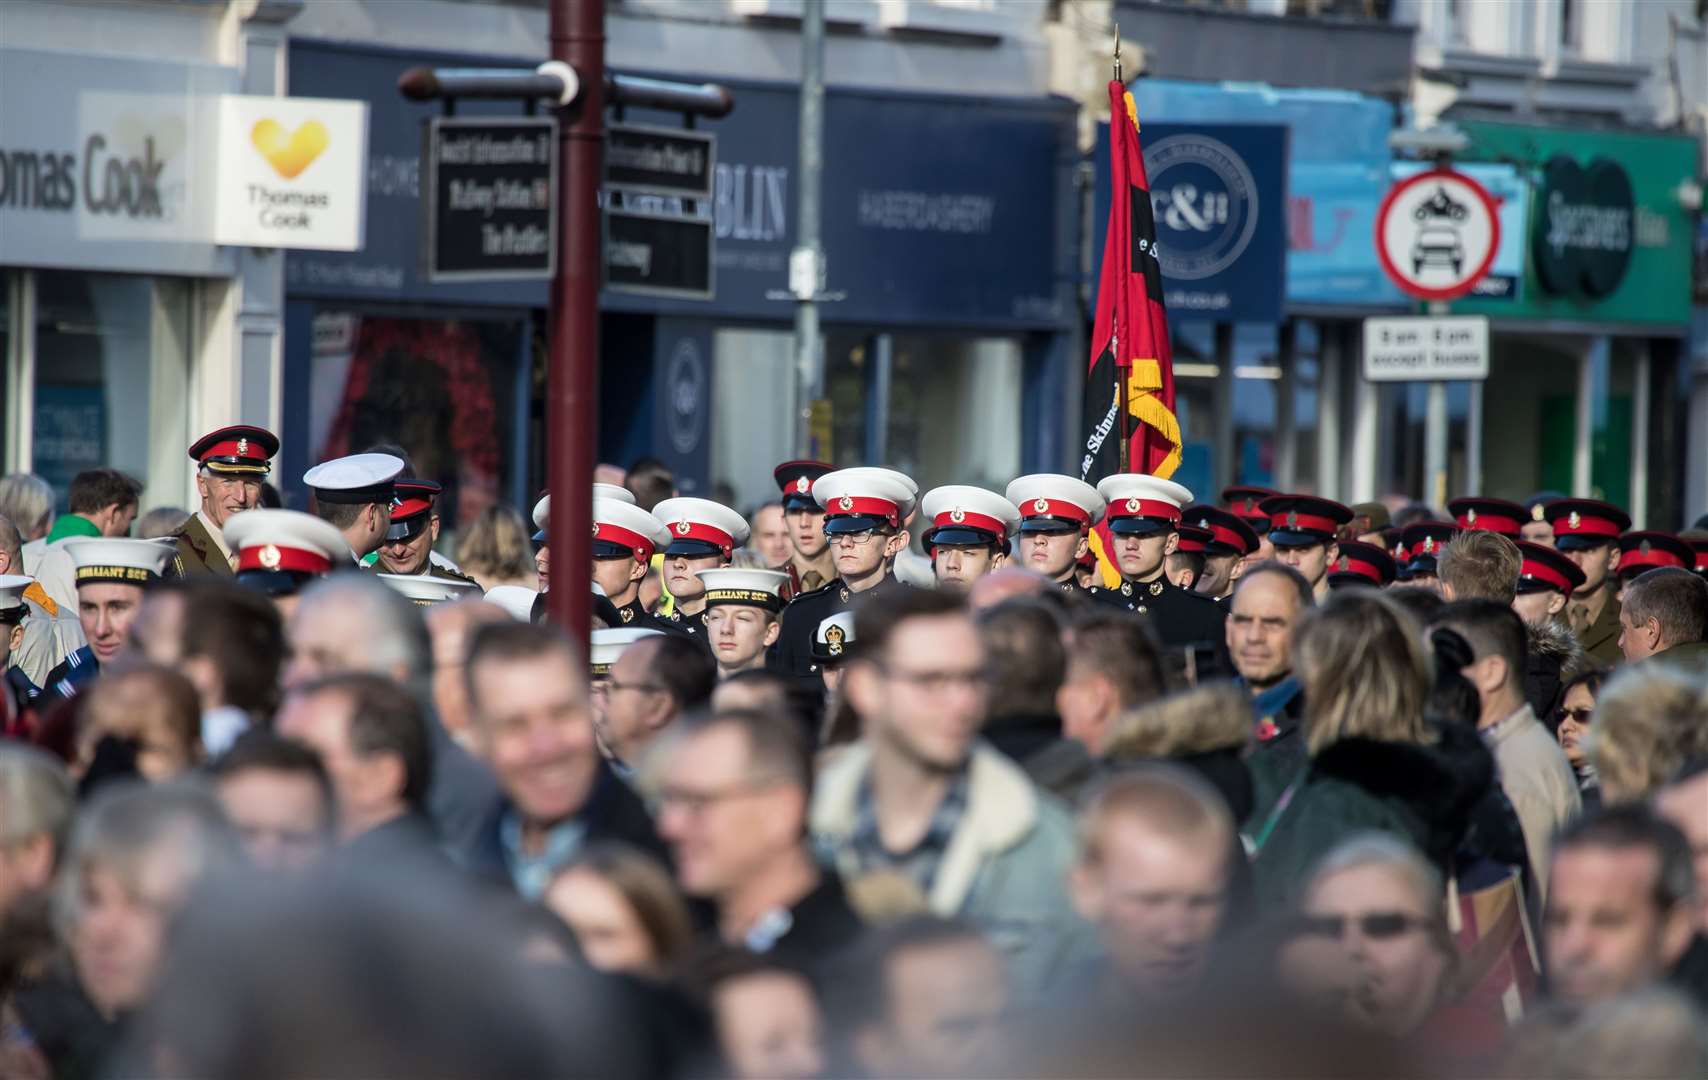 Parades in Tunbridge Wells have taken place year after year. Picture: Jonathan Lewis